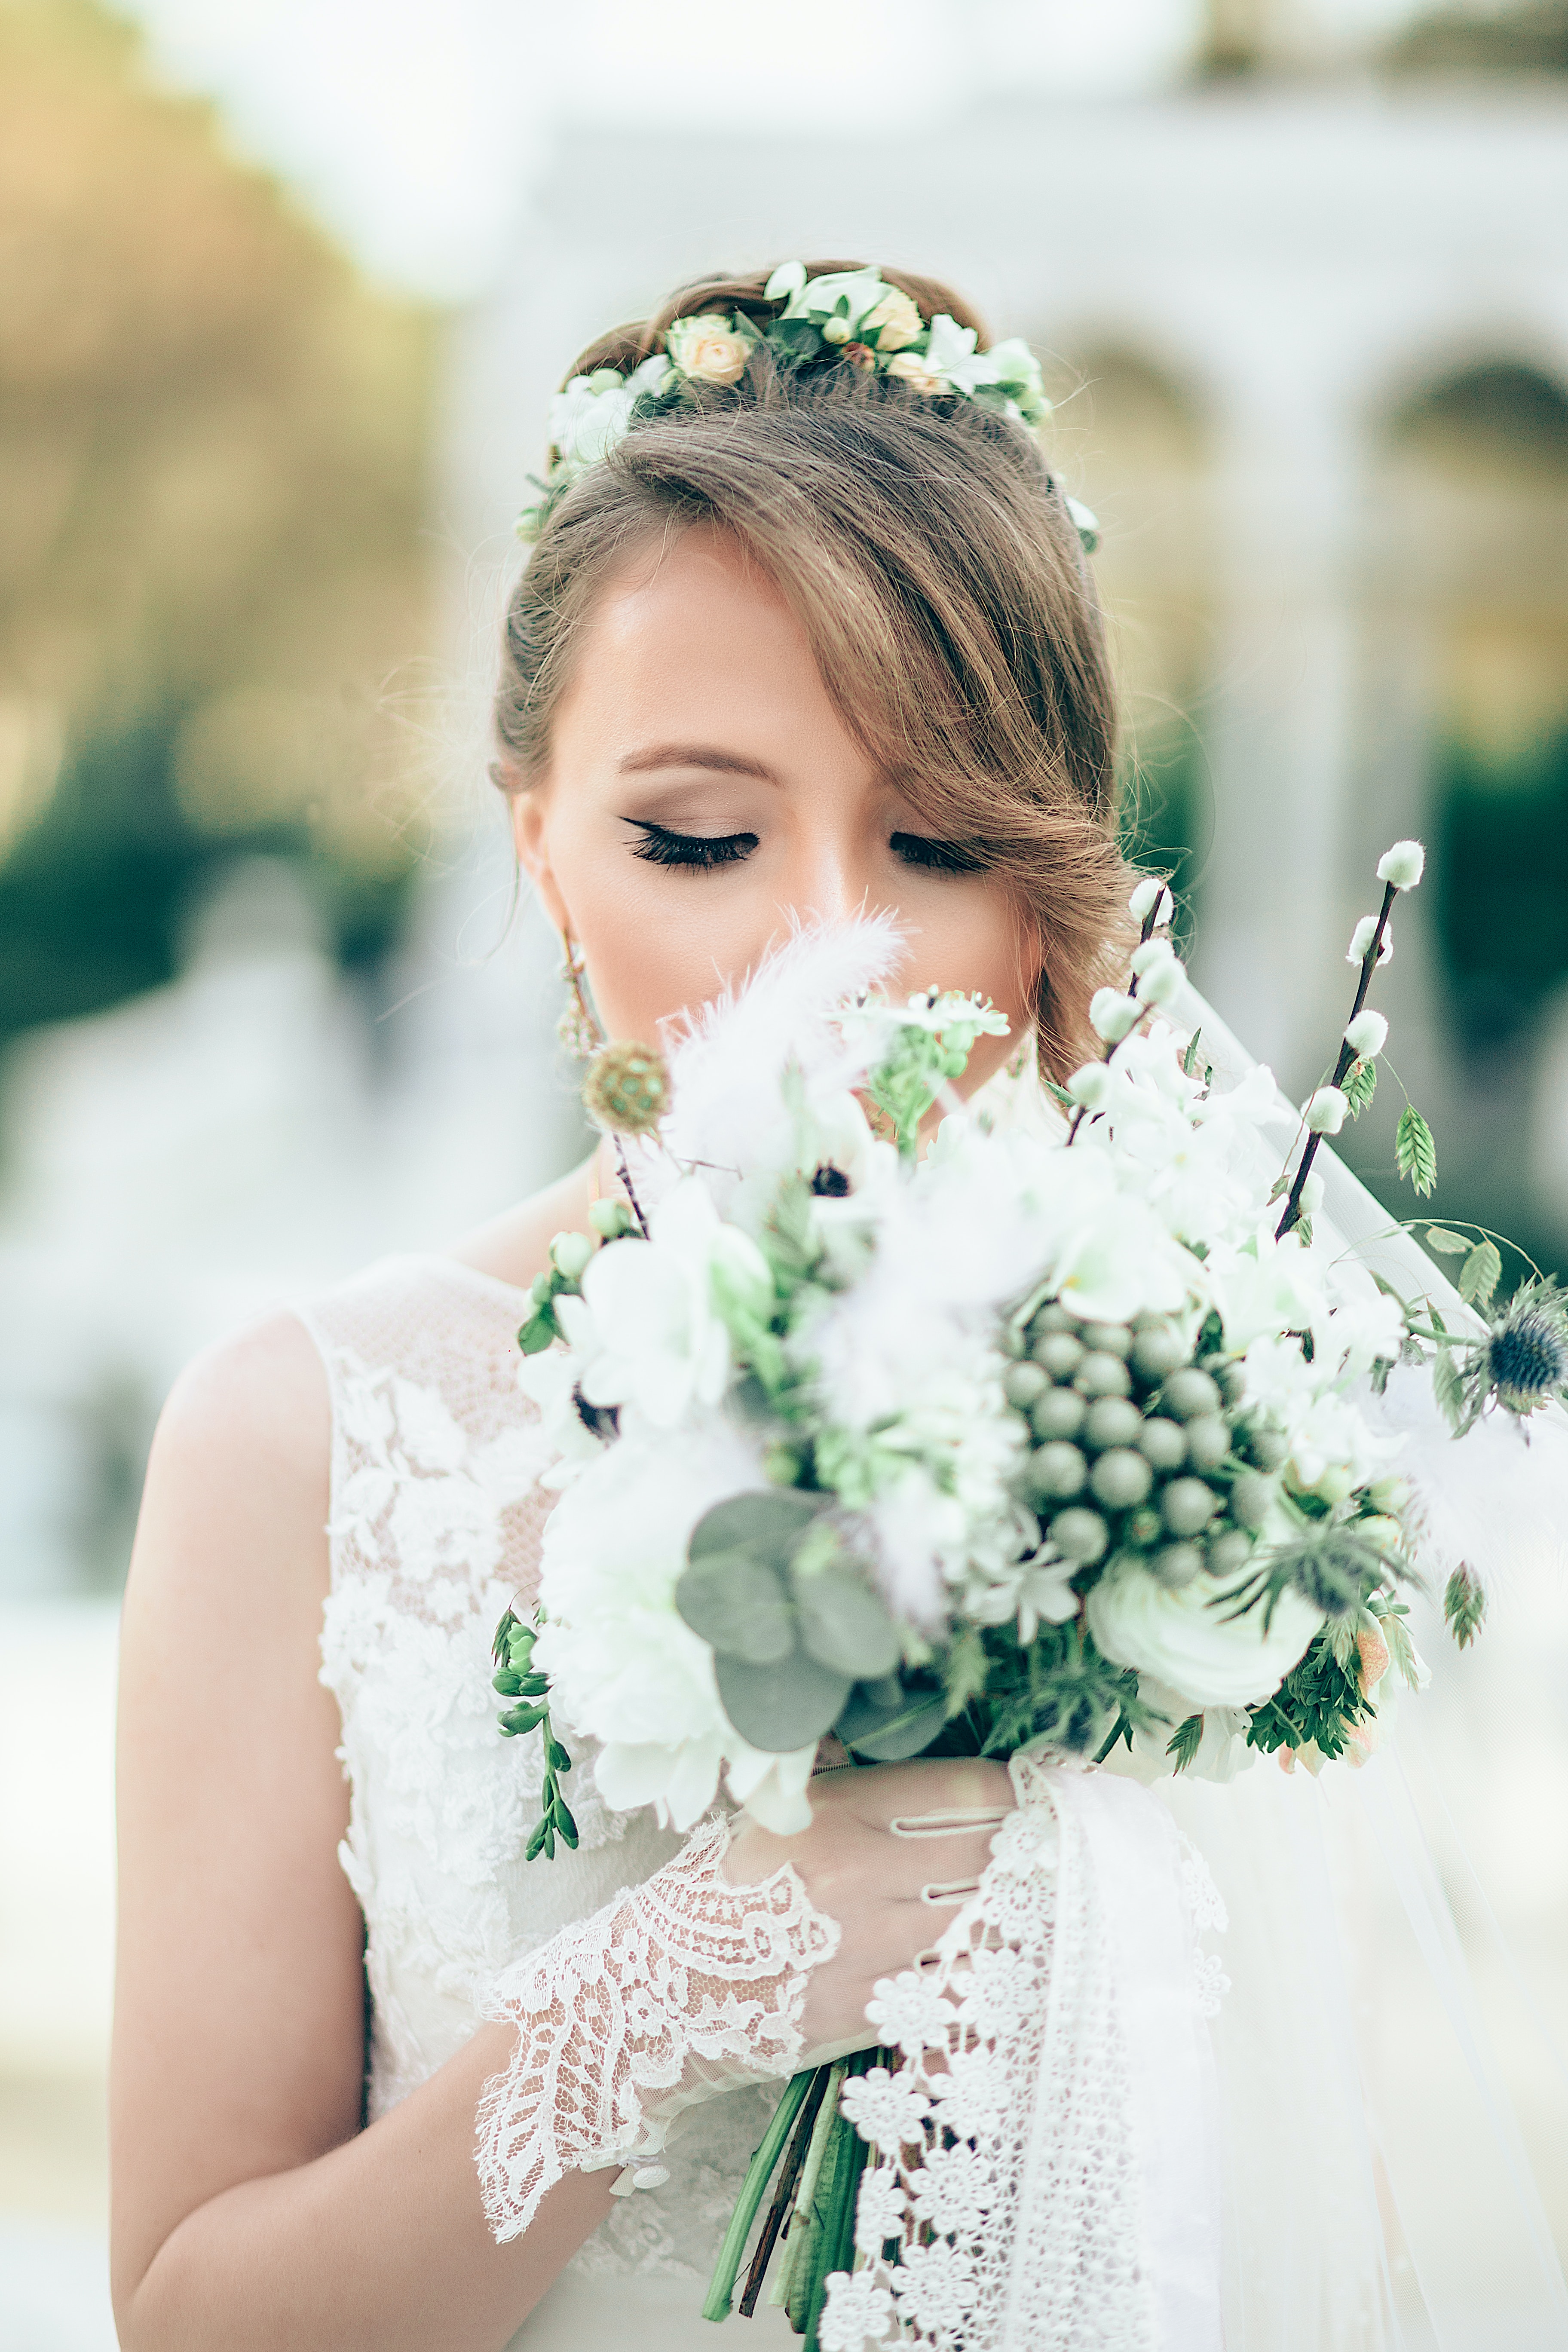 How to Pick the Best Bridal Bouquets for Every Beach Brides Dream Day?